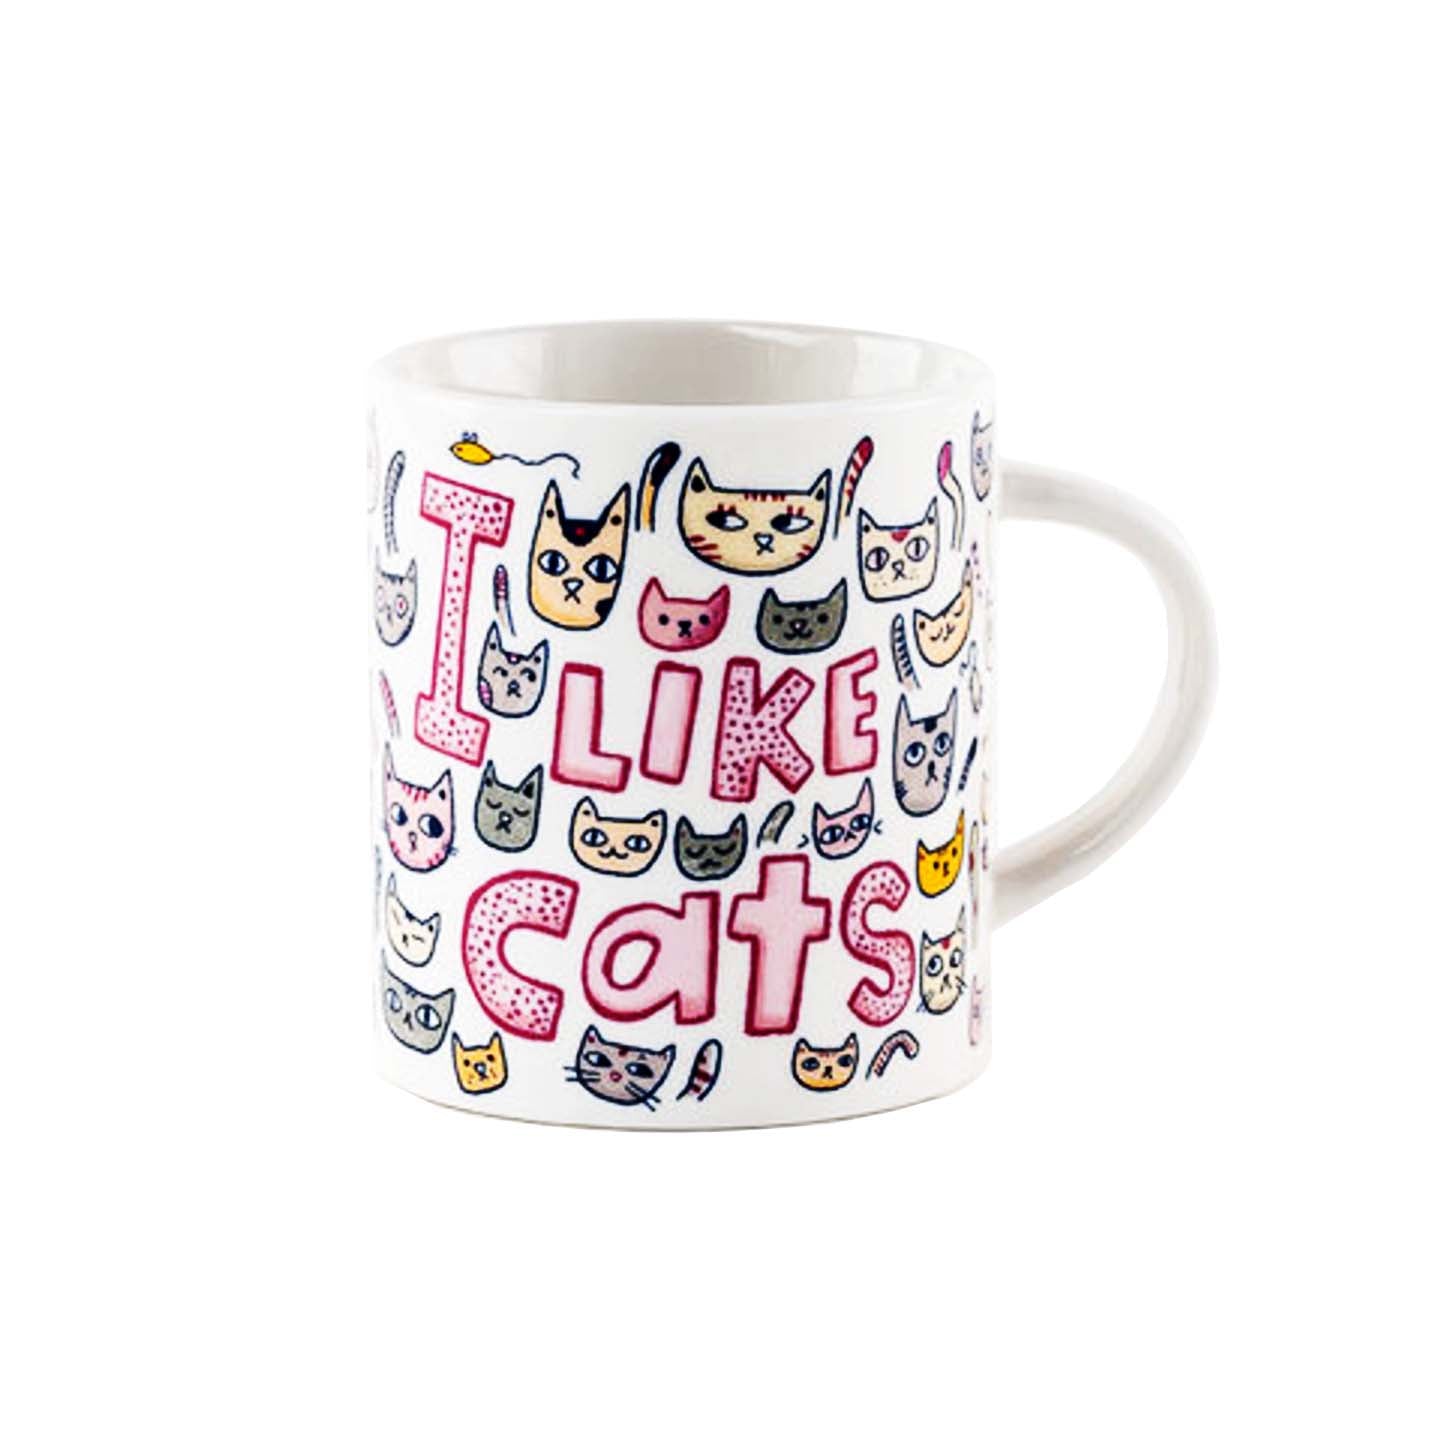 White ceramic mug illustrated with adorable cat faces and the caption "I Like Cats".